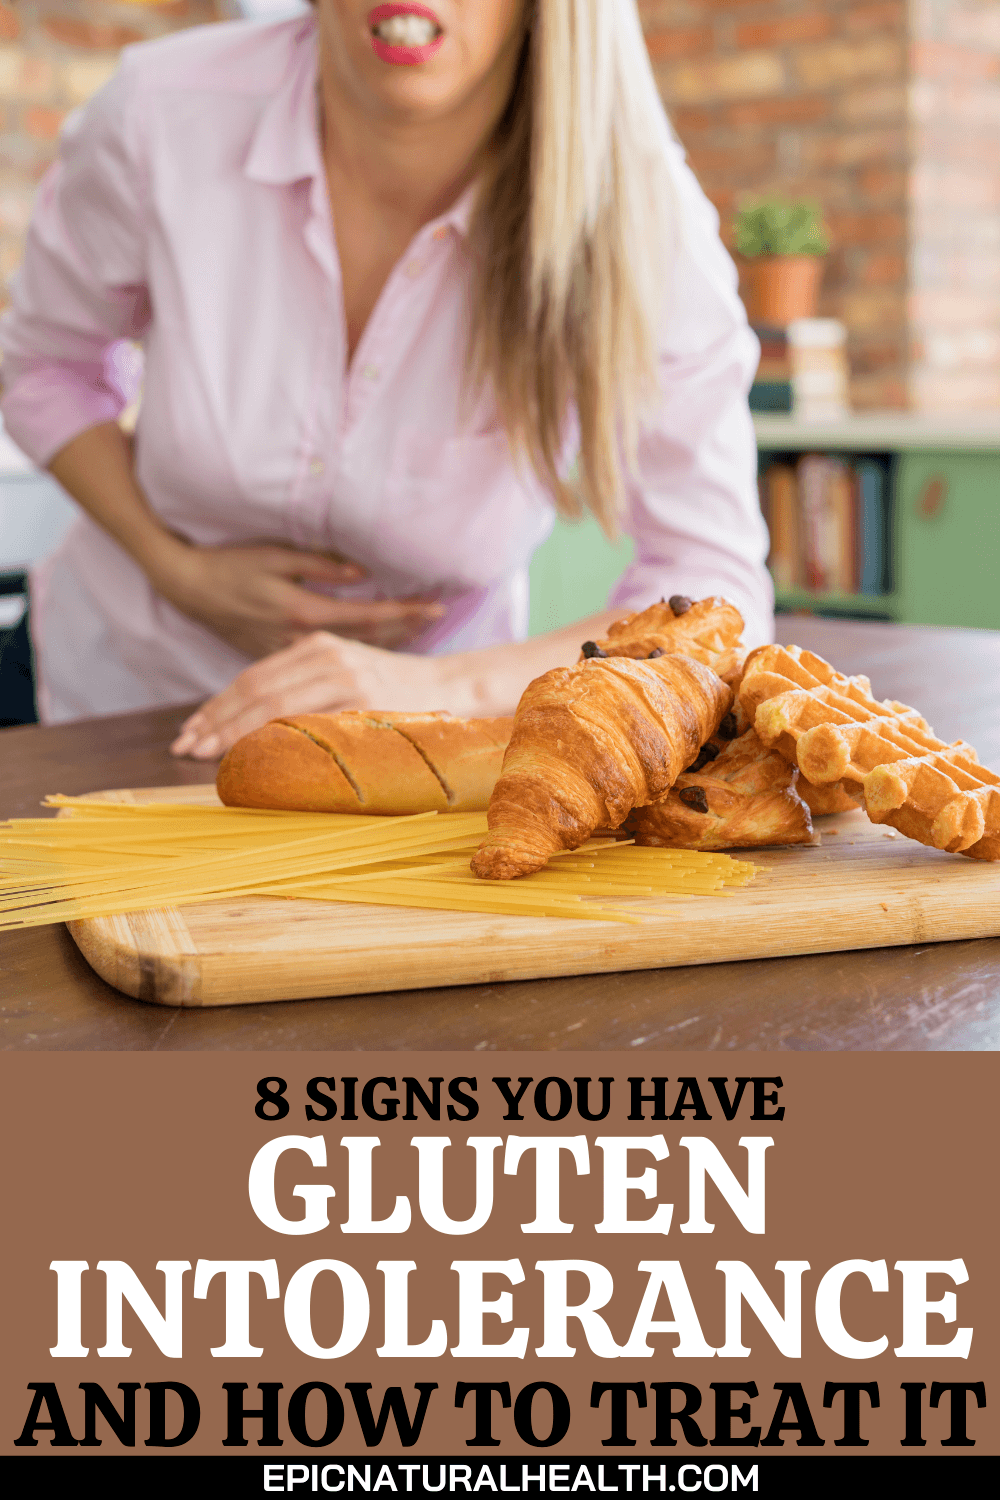 8 signs you have gluten intolerance and how to treat it